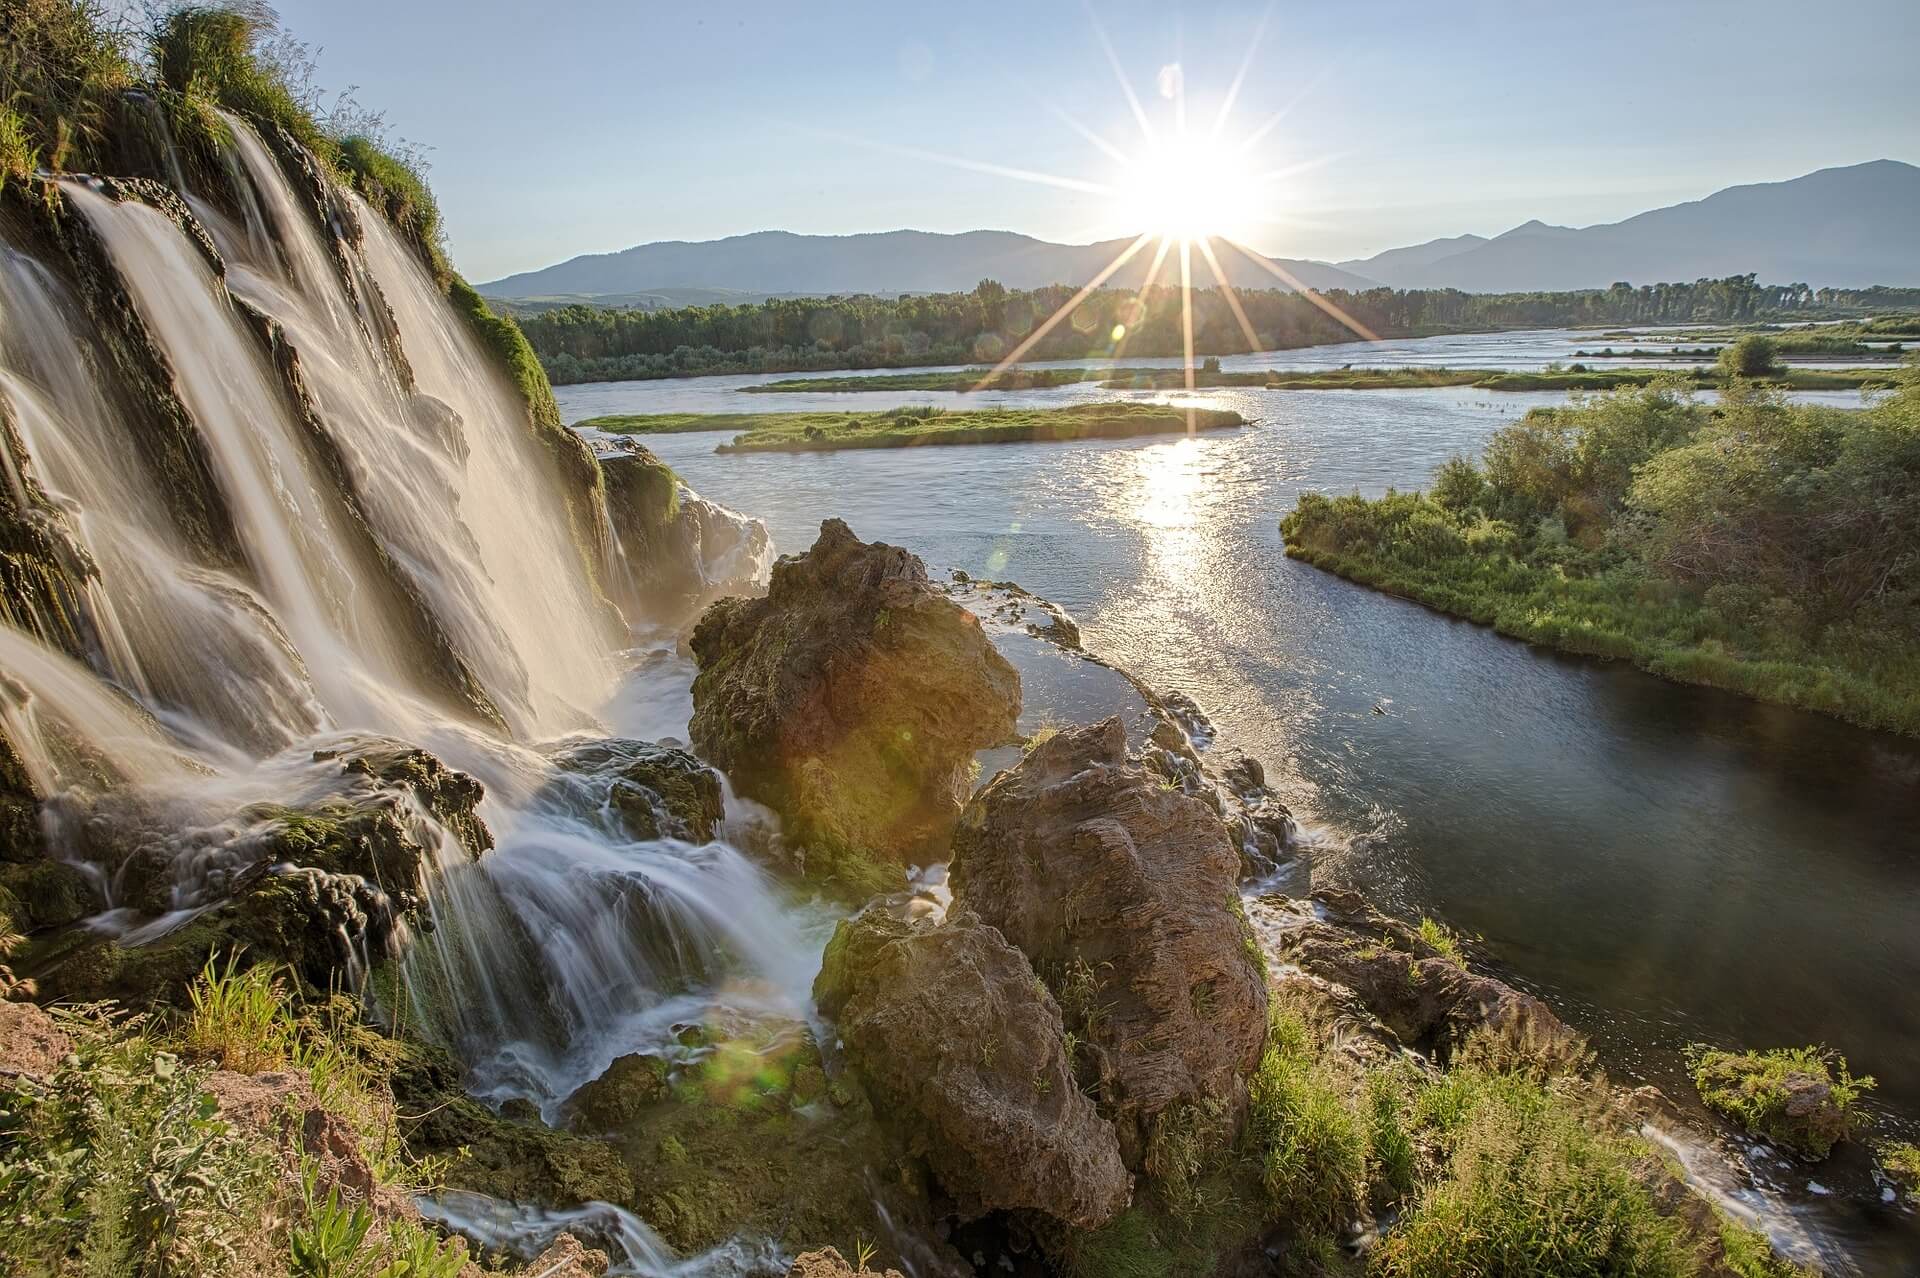 A picture of a waterfall running into the Snake River with mountains in the background